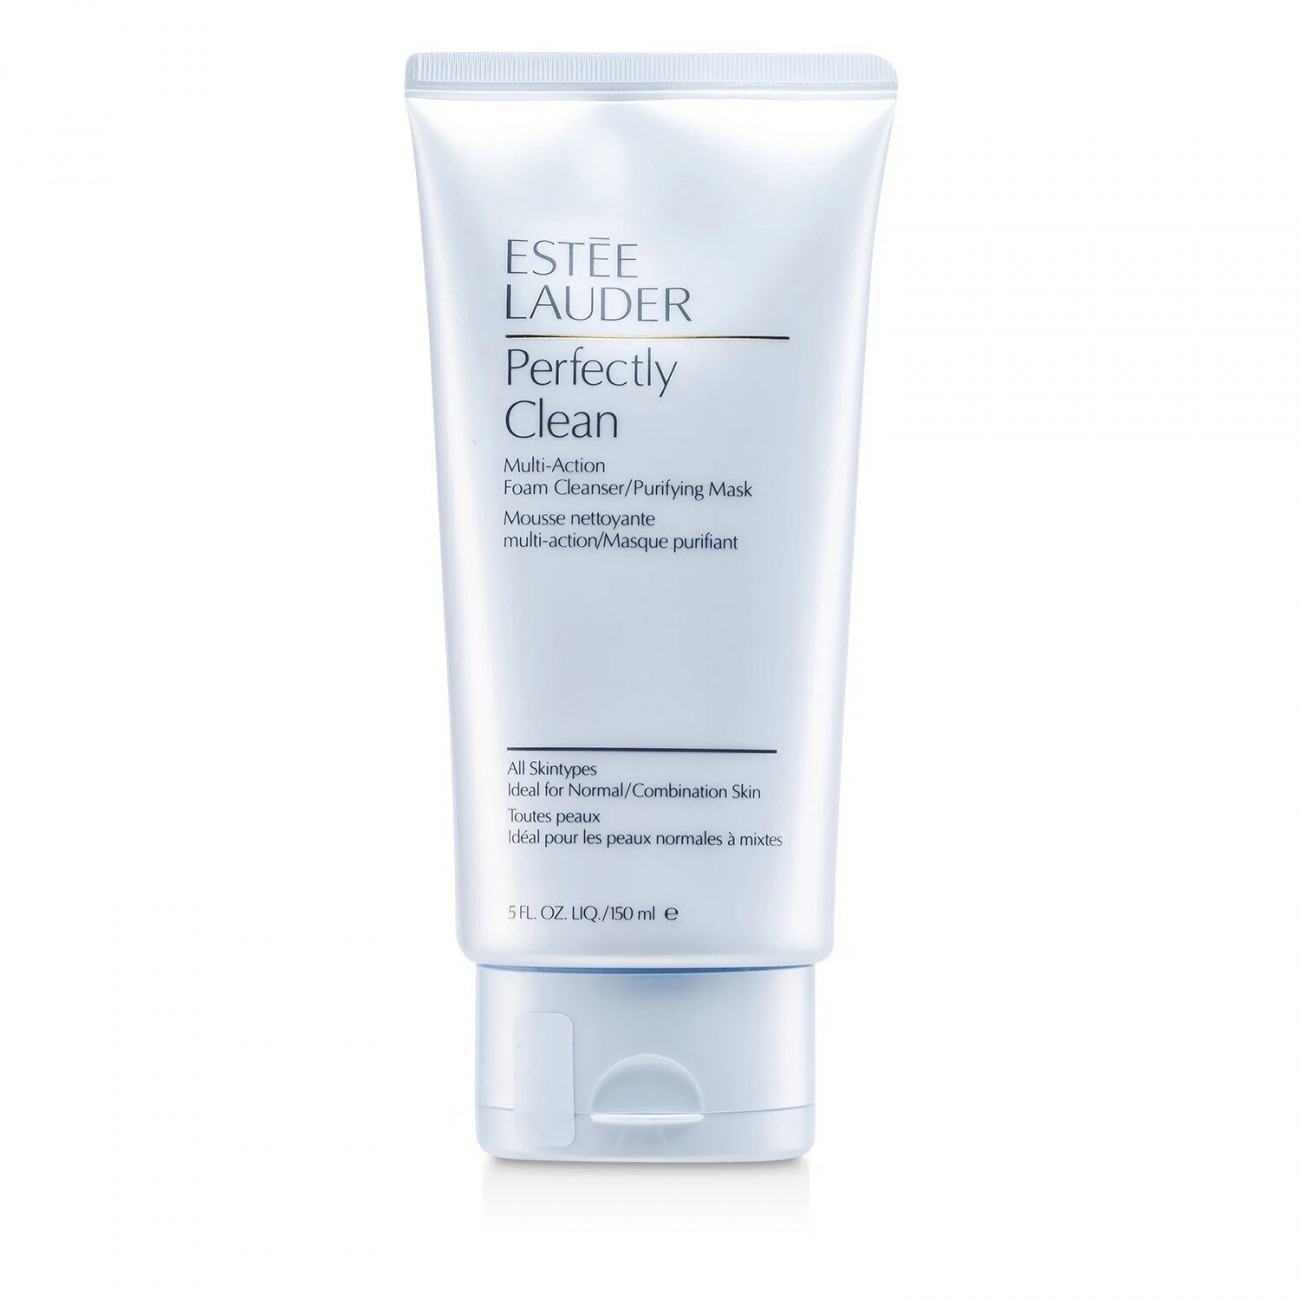 Multi-Action Foam Cleanser Purifying Mask